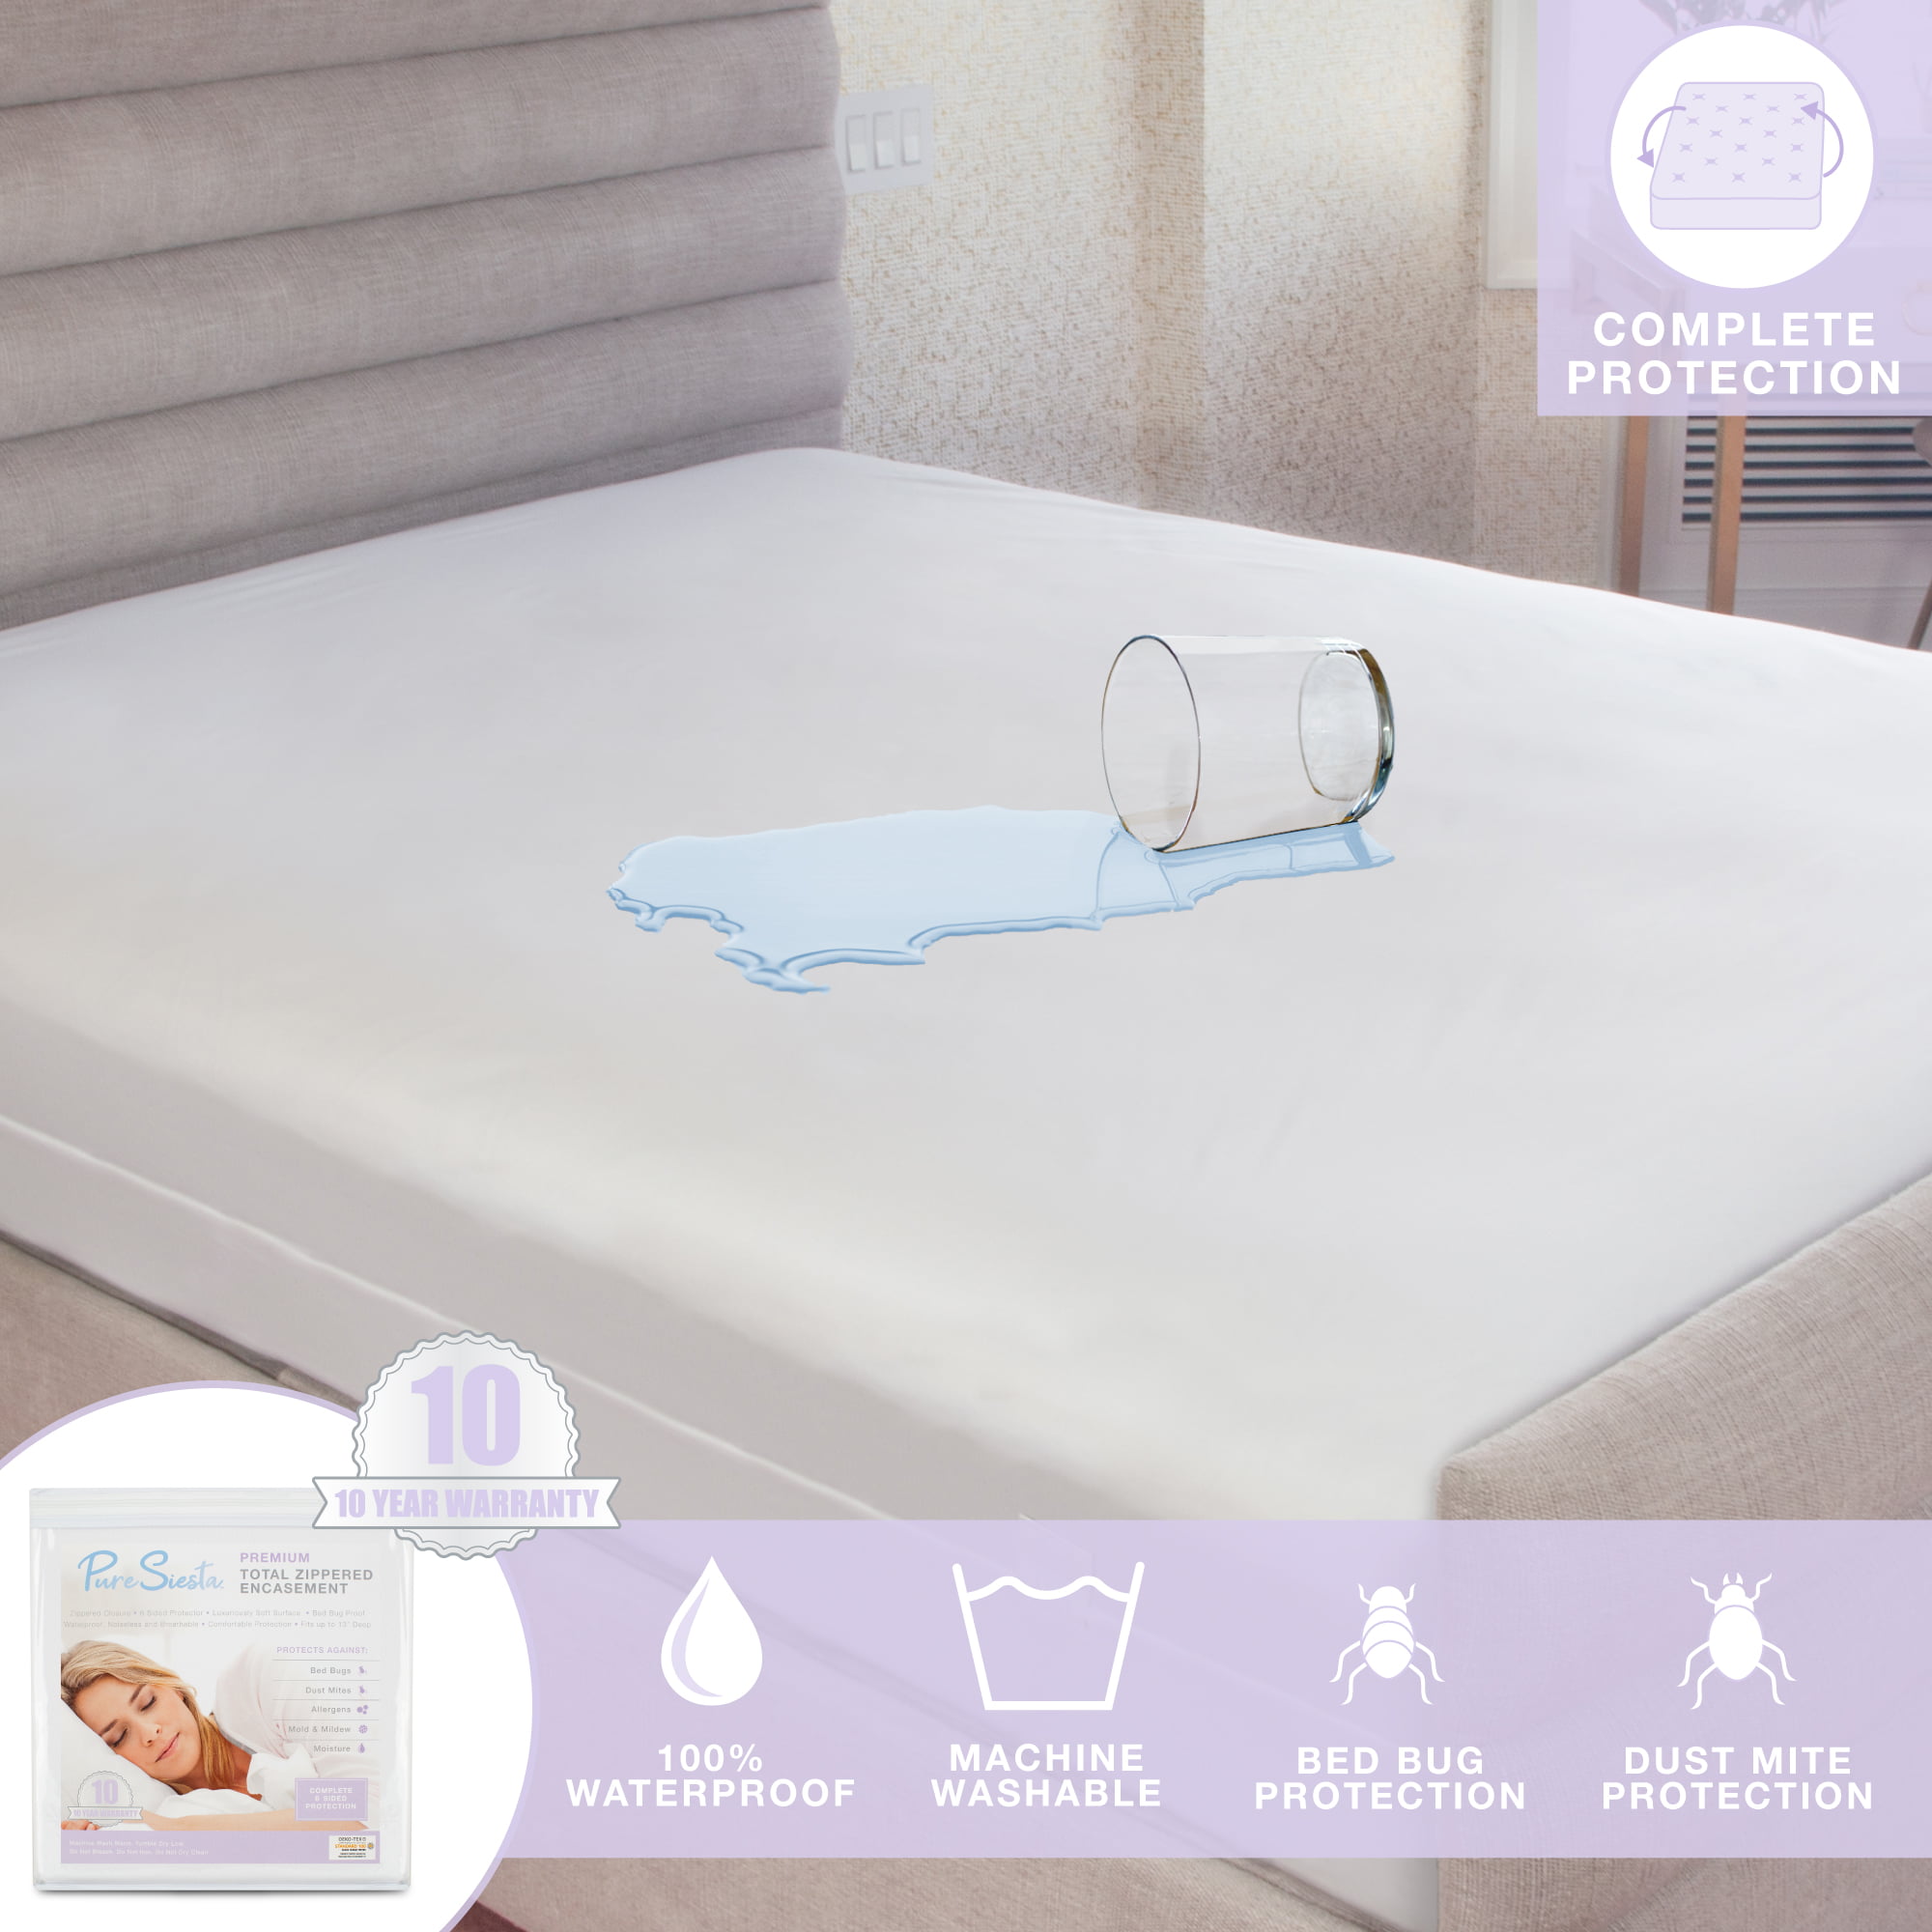 Deep Pocket Mattress Protector Queen Size Bed Bug Dust Mite Waterproof Cover Pad 